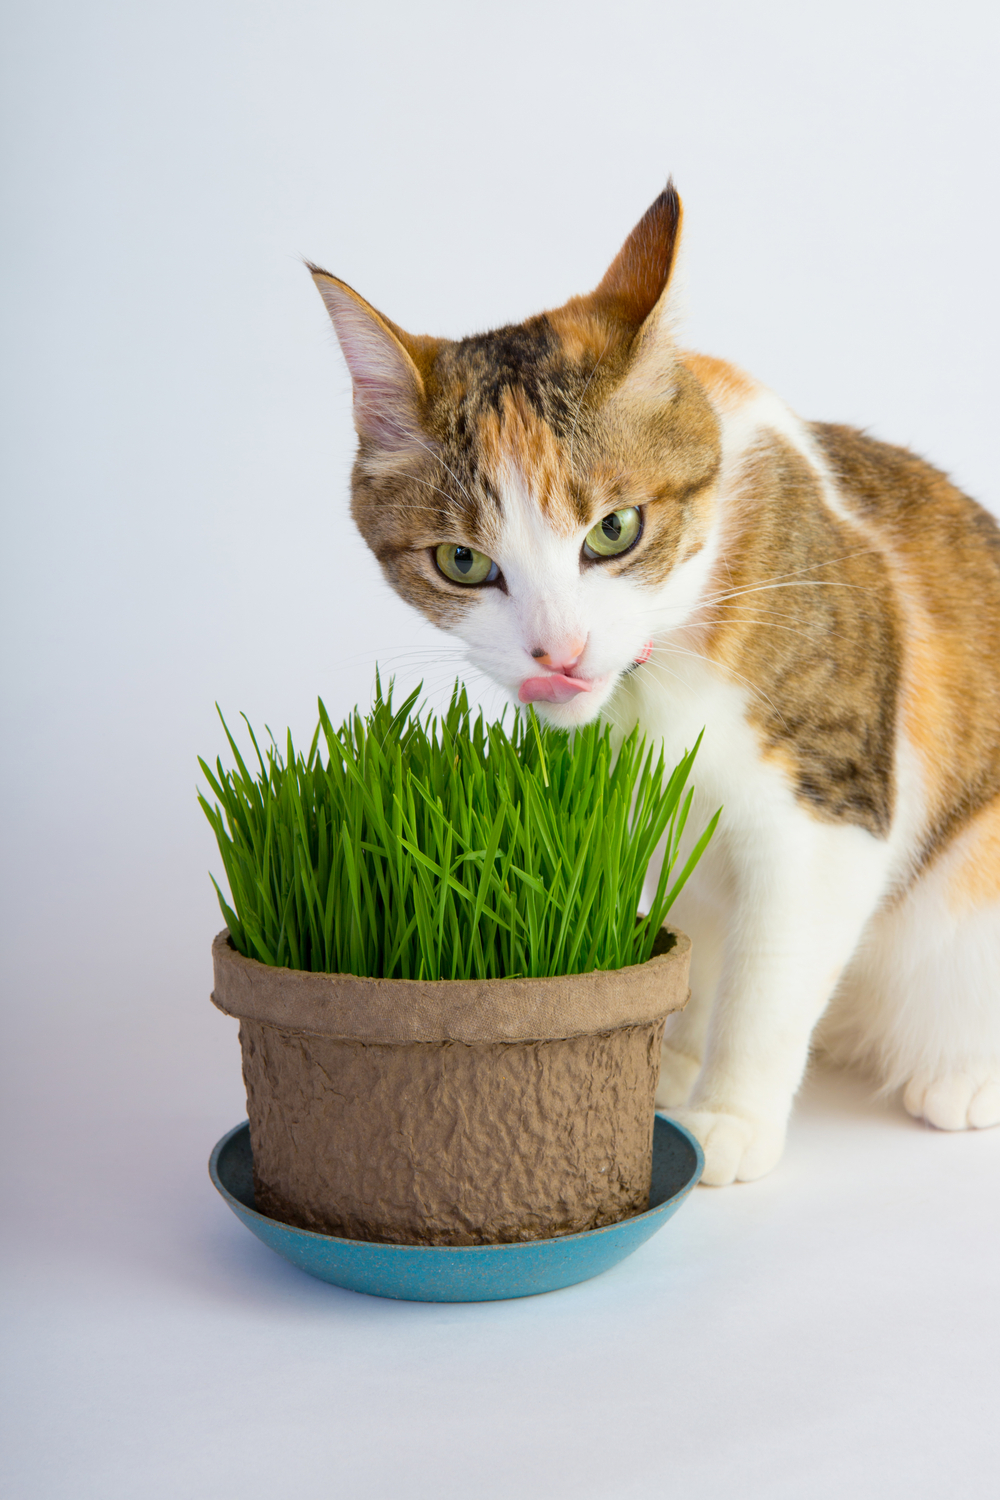 Various possible reasons for eating grass in cats